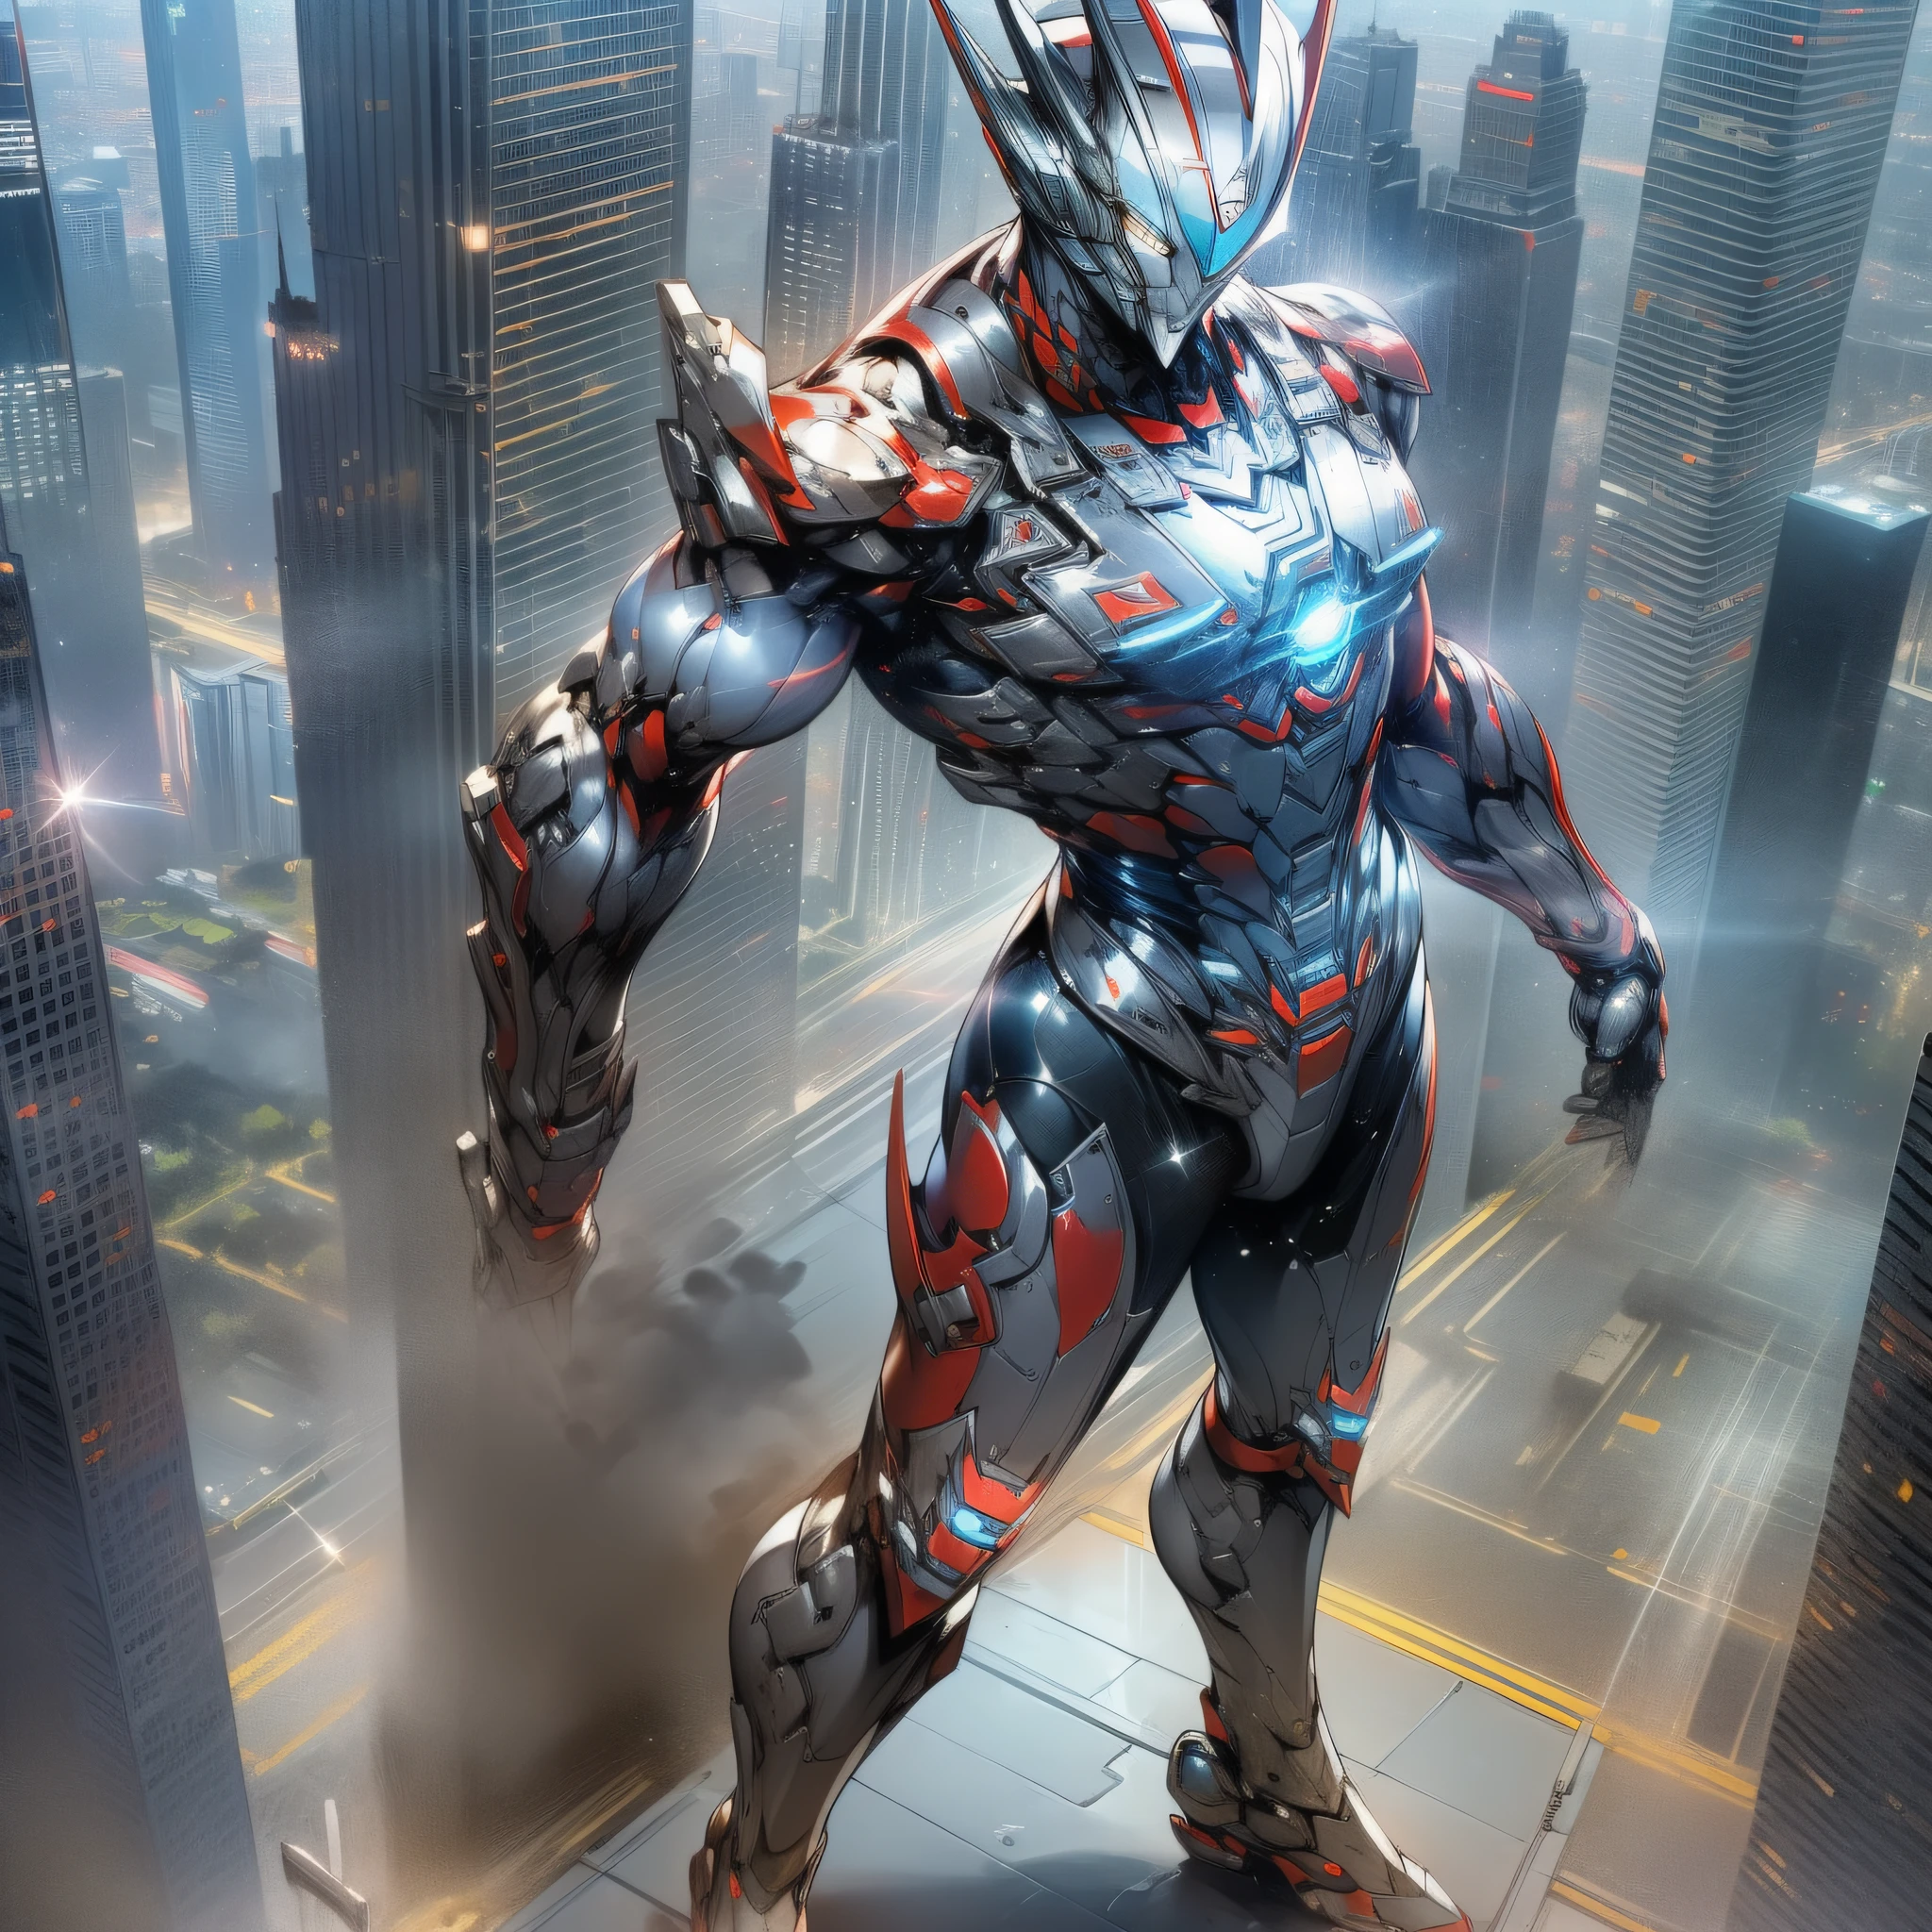 (Masterpiece, Excellent, Ultra Delicate, High Resolution), Male Focus, (((Ultraman))), (((No Muscles))), (His head is tapered, his body is made of red and silver, his arms are streamlined, there is a round calculator on his chest, he looks tall and thin, the overall look is streamlined and modern), (Standing pose), Pose for Photo, High Angle, Dark Night, City Ruins, Background Details, ((((Full Body))), from above, Solo, ((((Sense of Greatness) ))